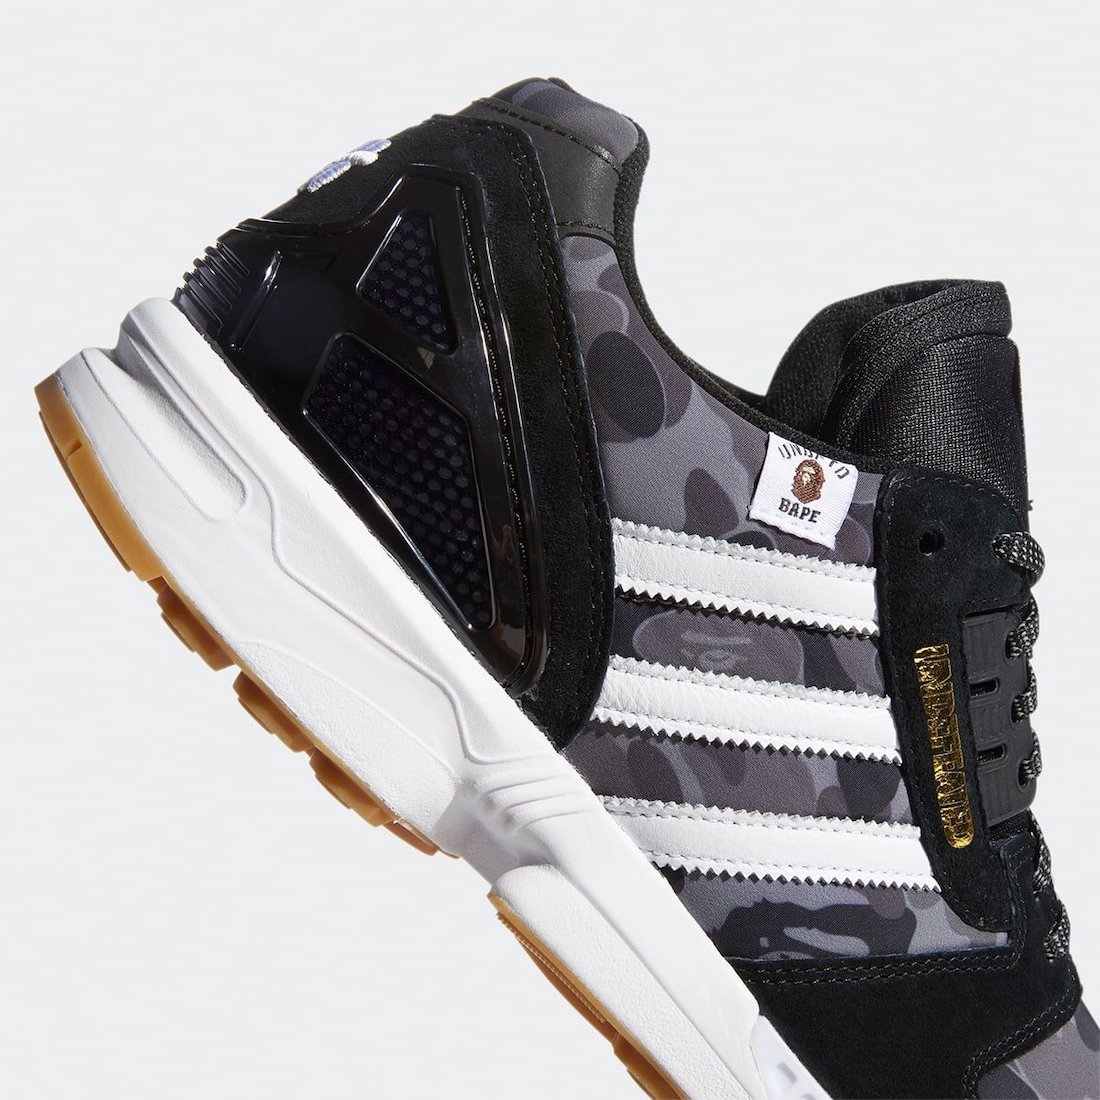 BAPE Undefeated adidas ZX 8000 FY8852 Release Date